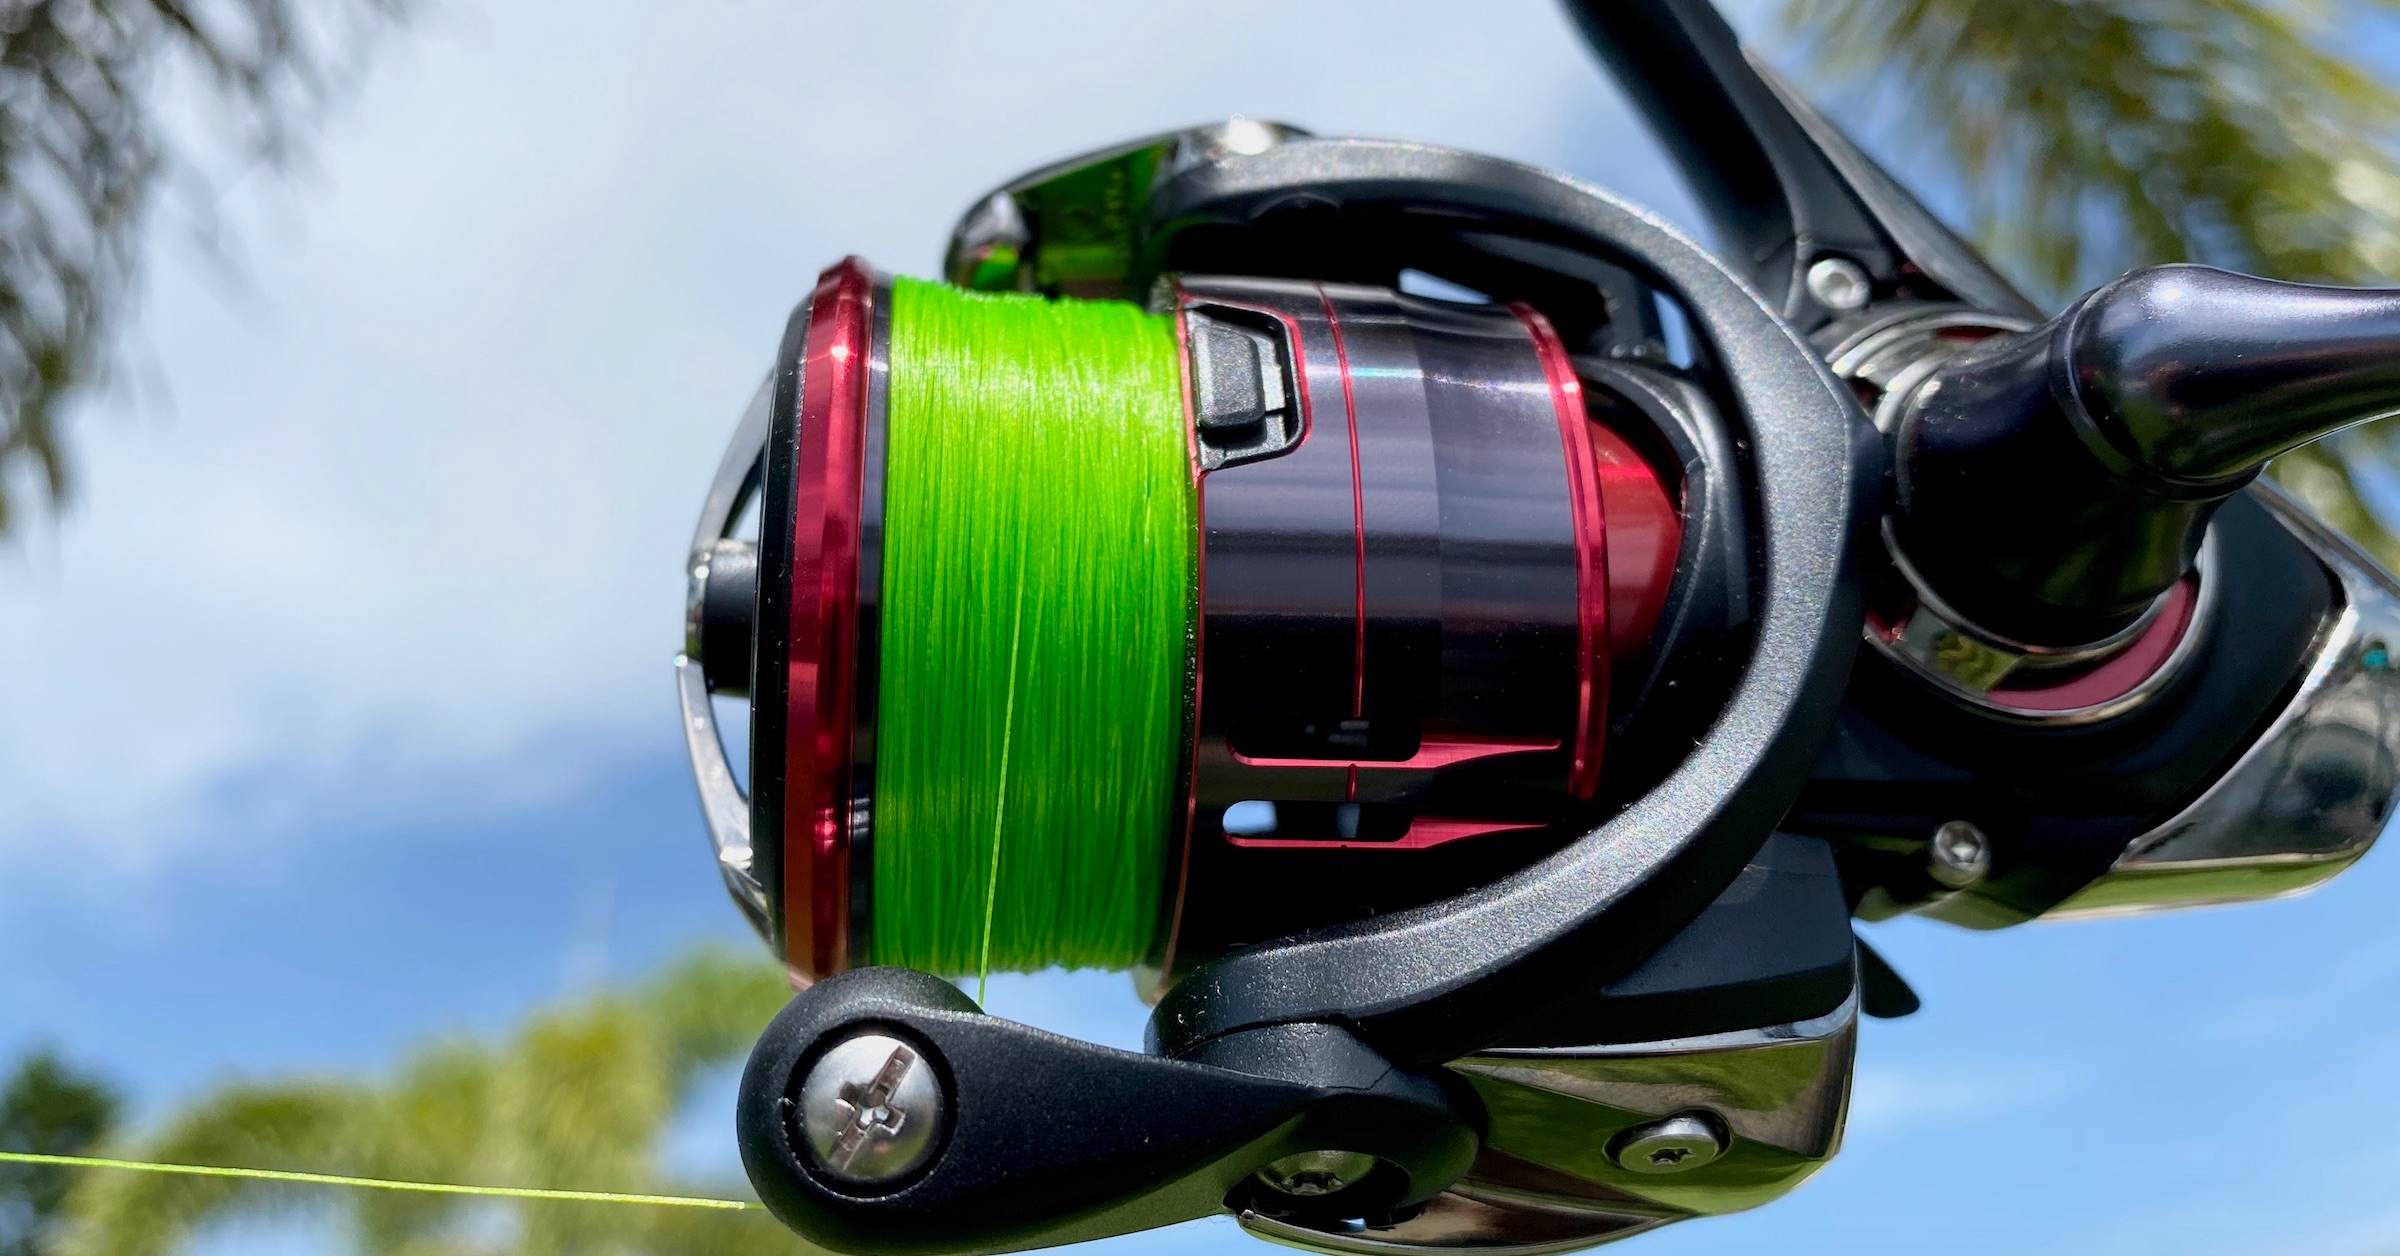 http://how%20to%20spool%20braid%20on%20a%20spinning%20reel